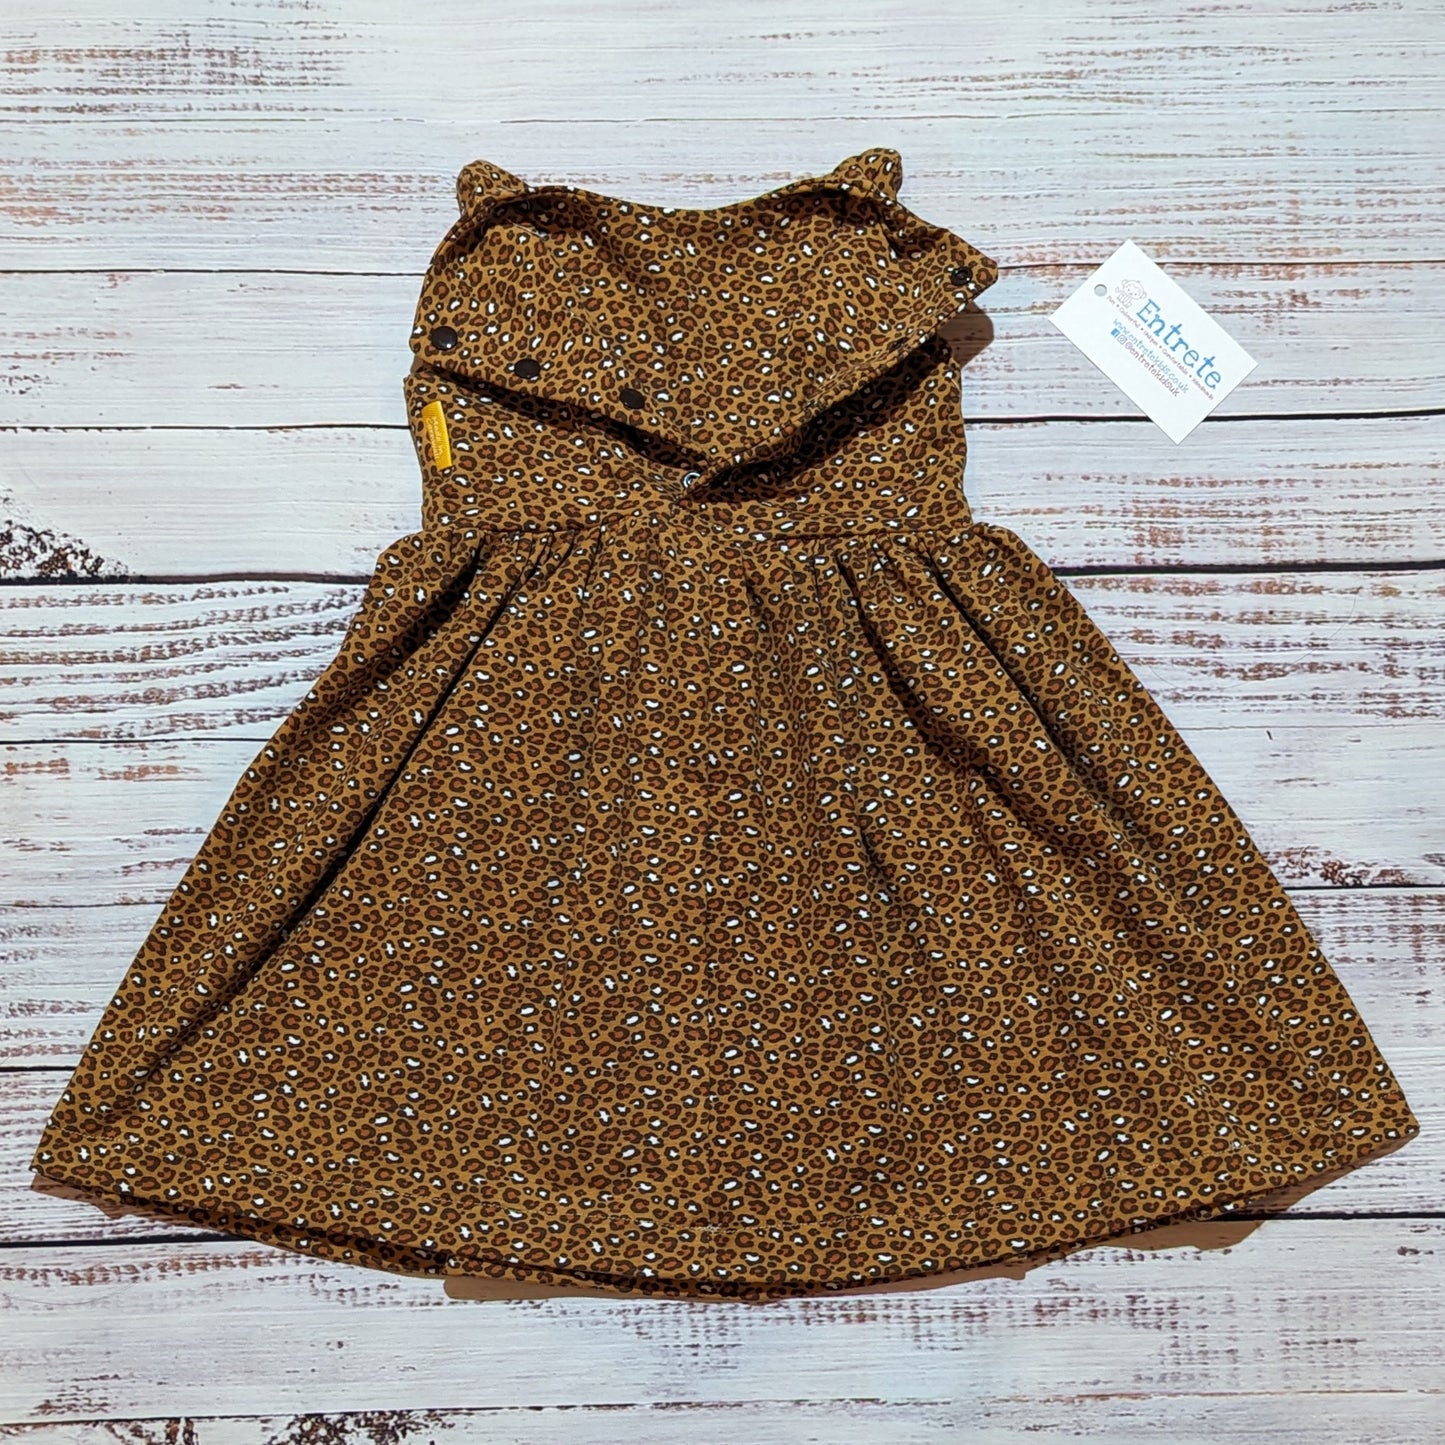 The cool camel leopard print girls dress. Handmade using soft and comfy organic cotton jersey. Shown with the back popper entry open.